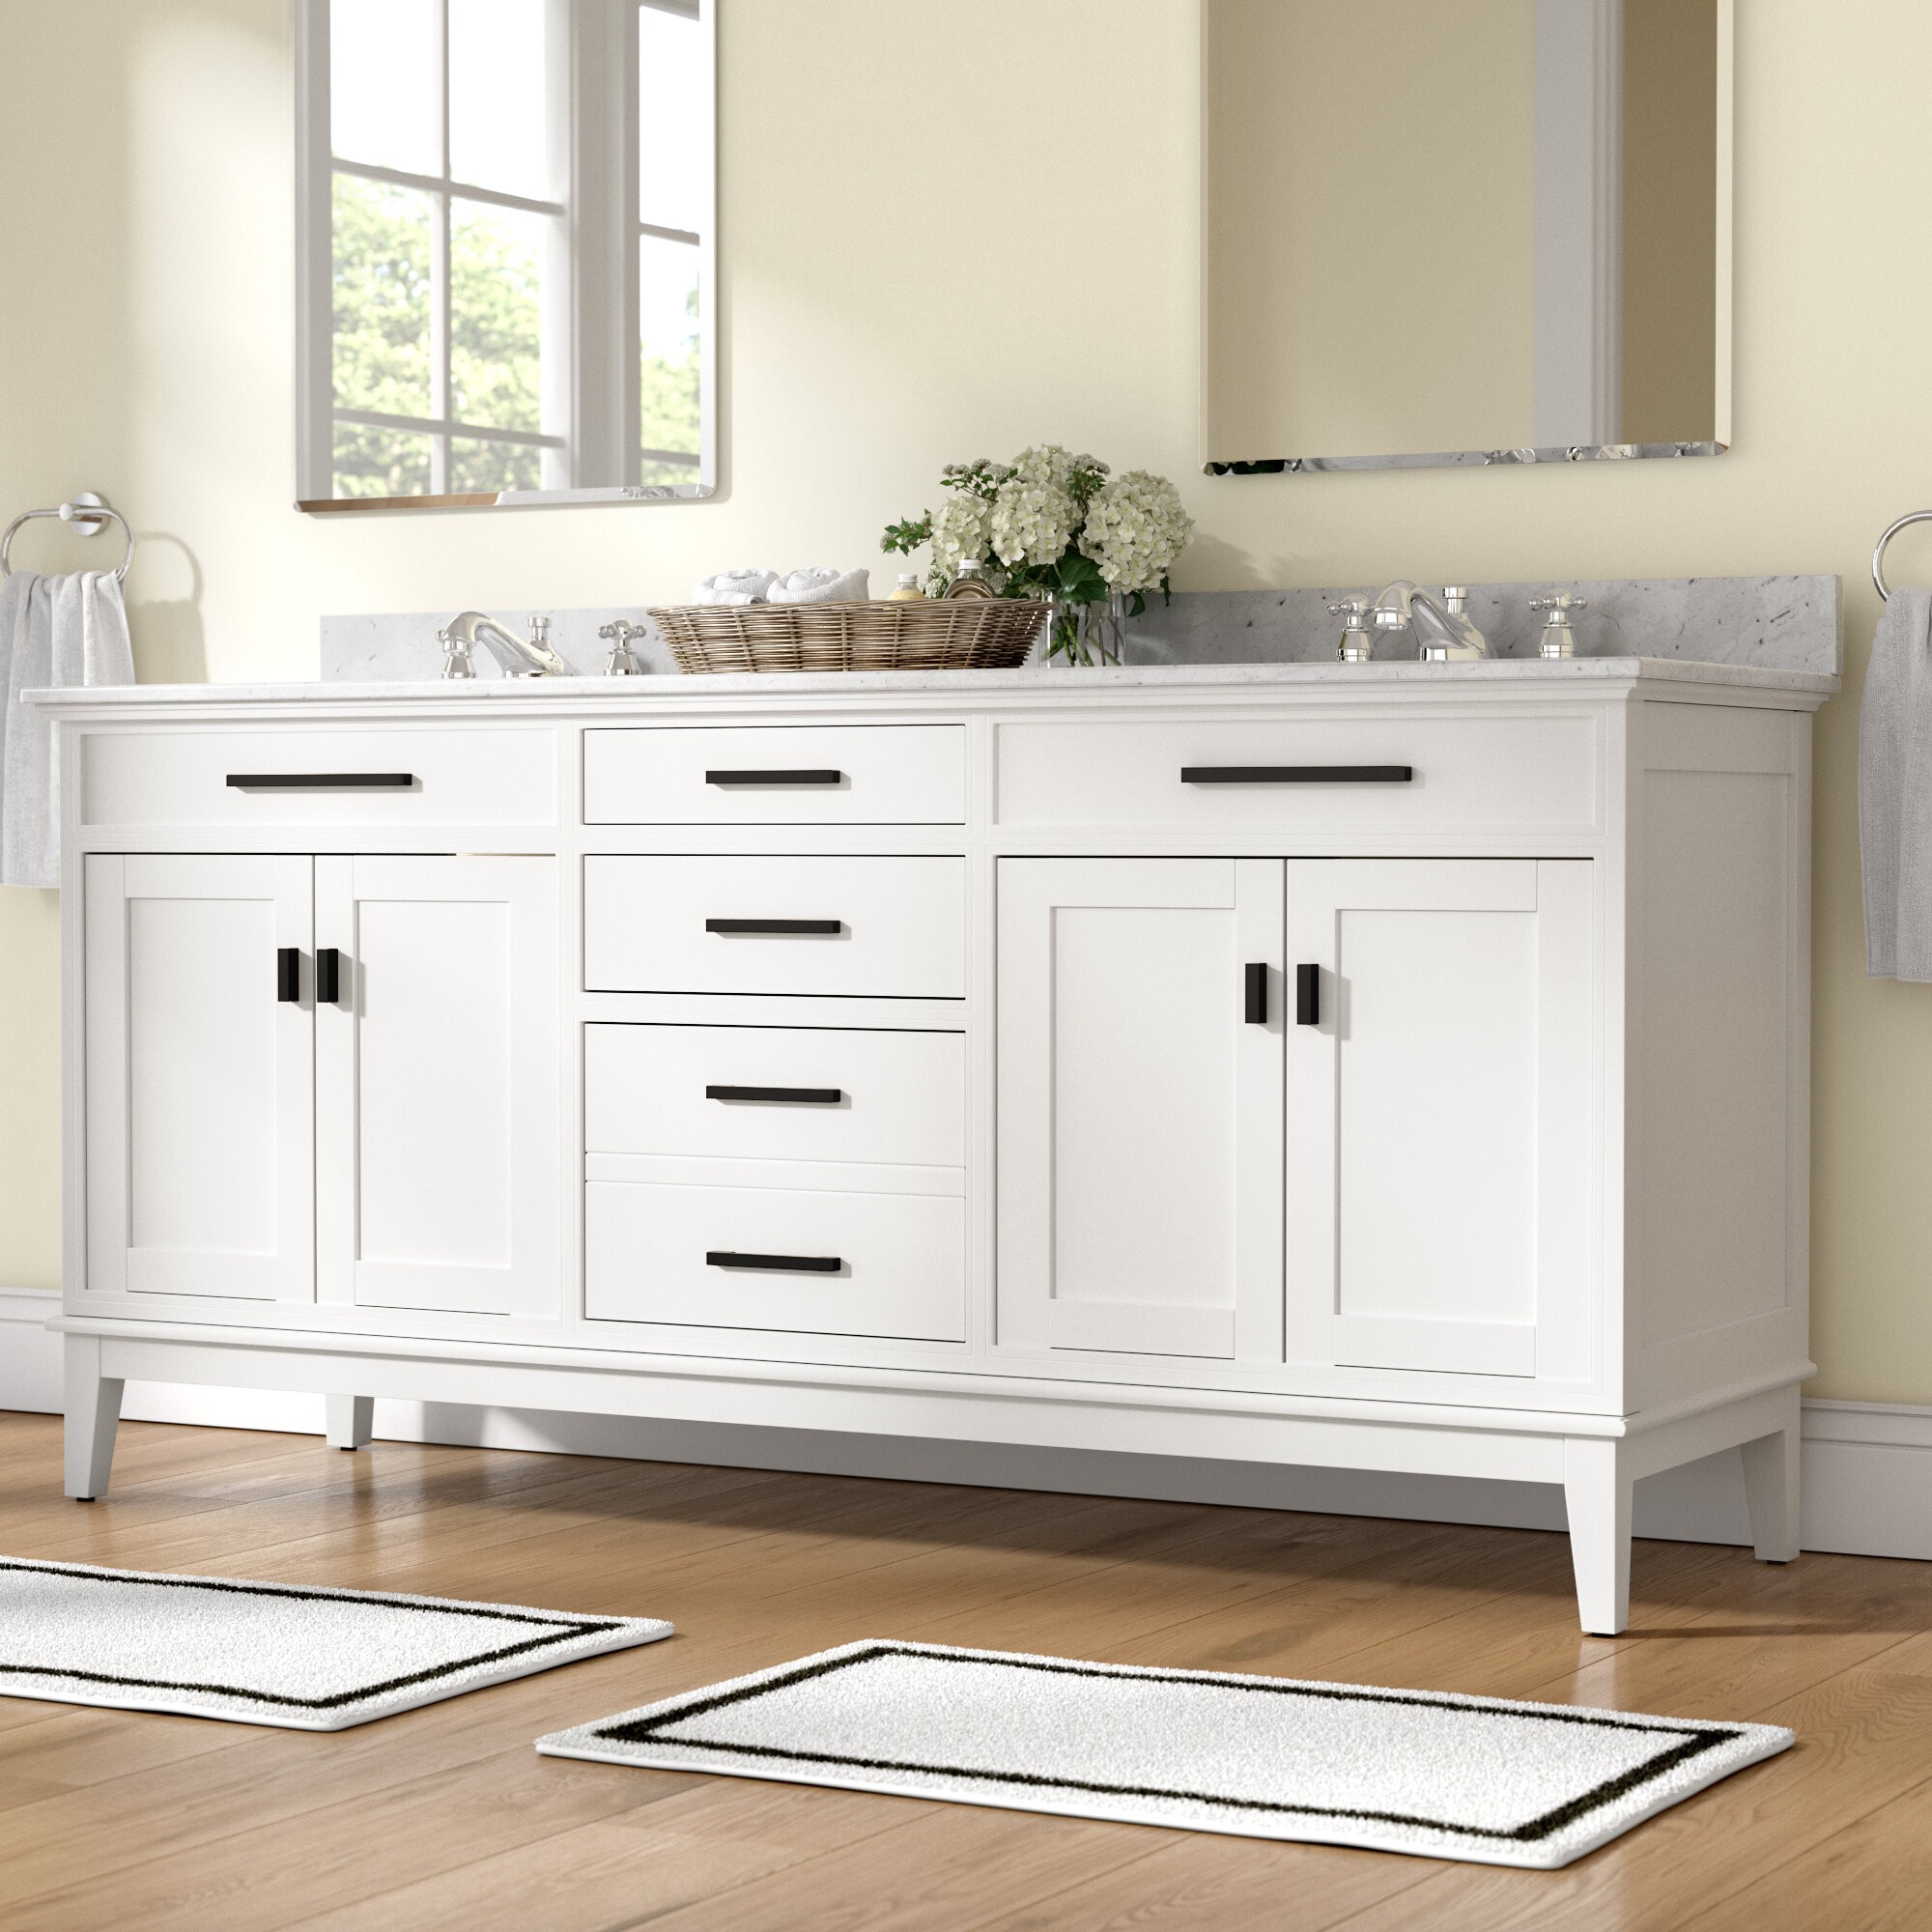 Chesterville 72" Double Bathroom Vanity Base Only in White